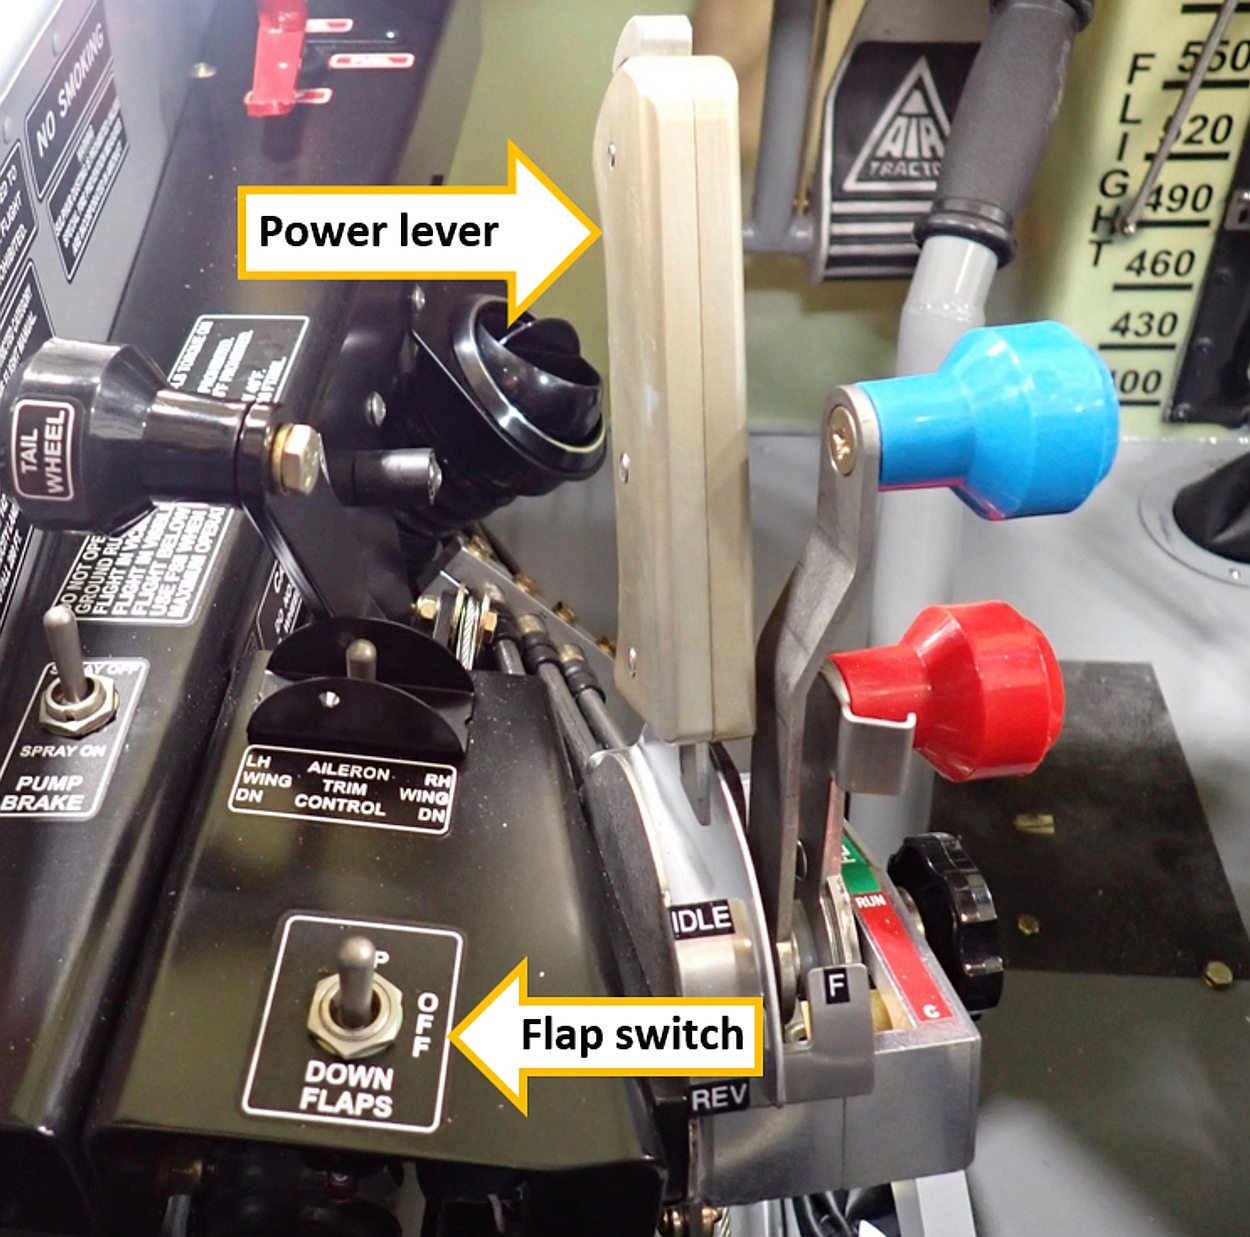 The power lever and flap switch of an exemplar aircraft (Source: Air Tractor, with TSB annotations)